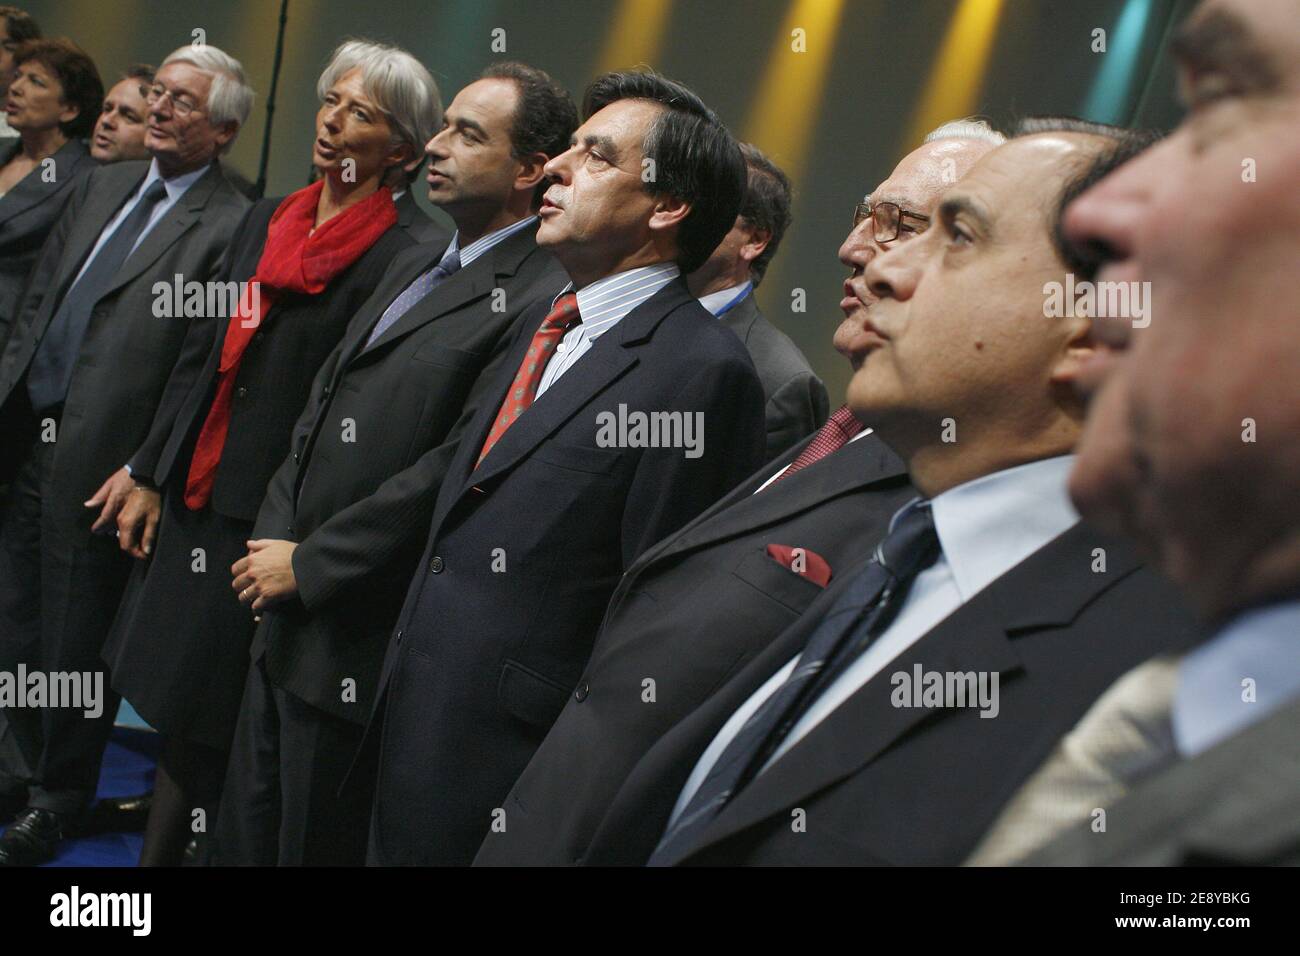 Josselin de Rohan, Economy minister Christine Lagarde, Jean-Francois Cope,  Prime Minister Francois Fillon, Junior Minister for Relations with the  Parliament Roger Karoutchi attend the 'UMP' parliamentary days in  Strasbourg, France on September